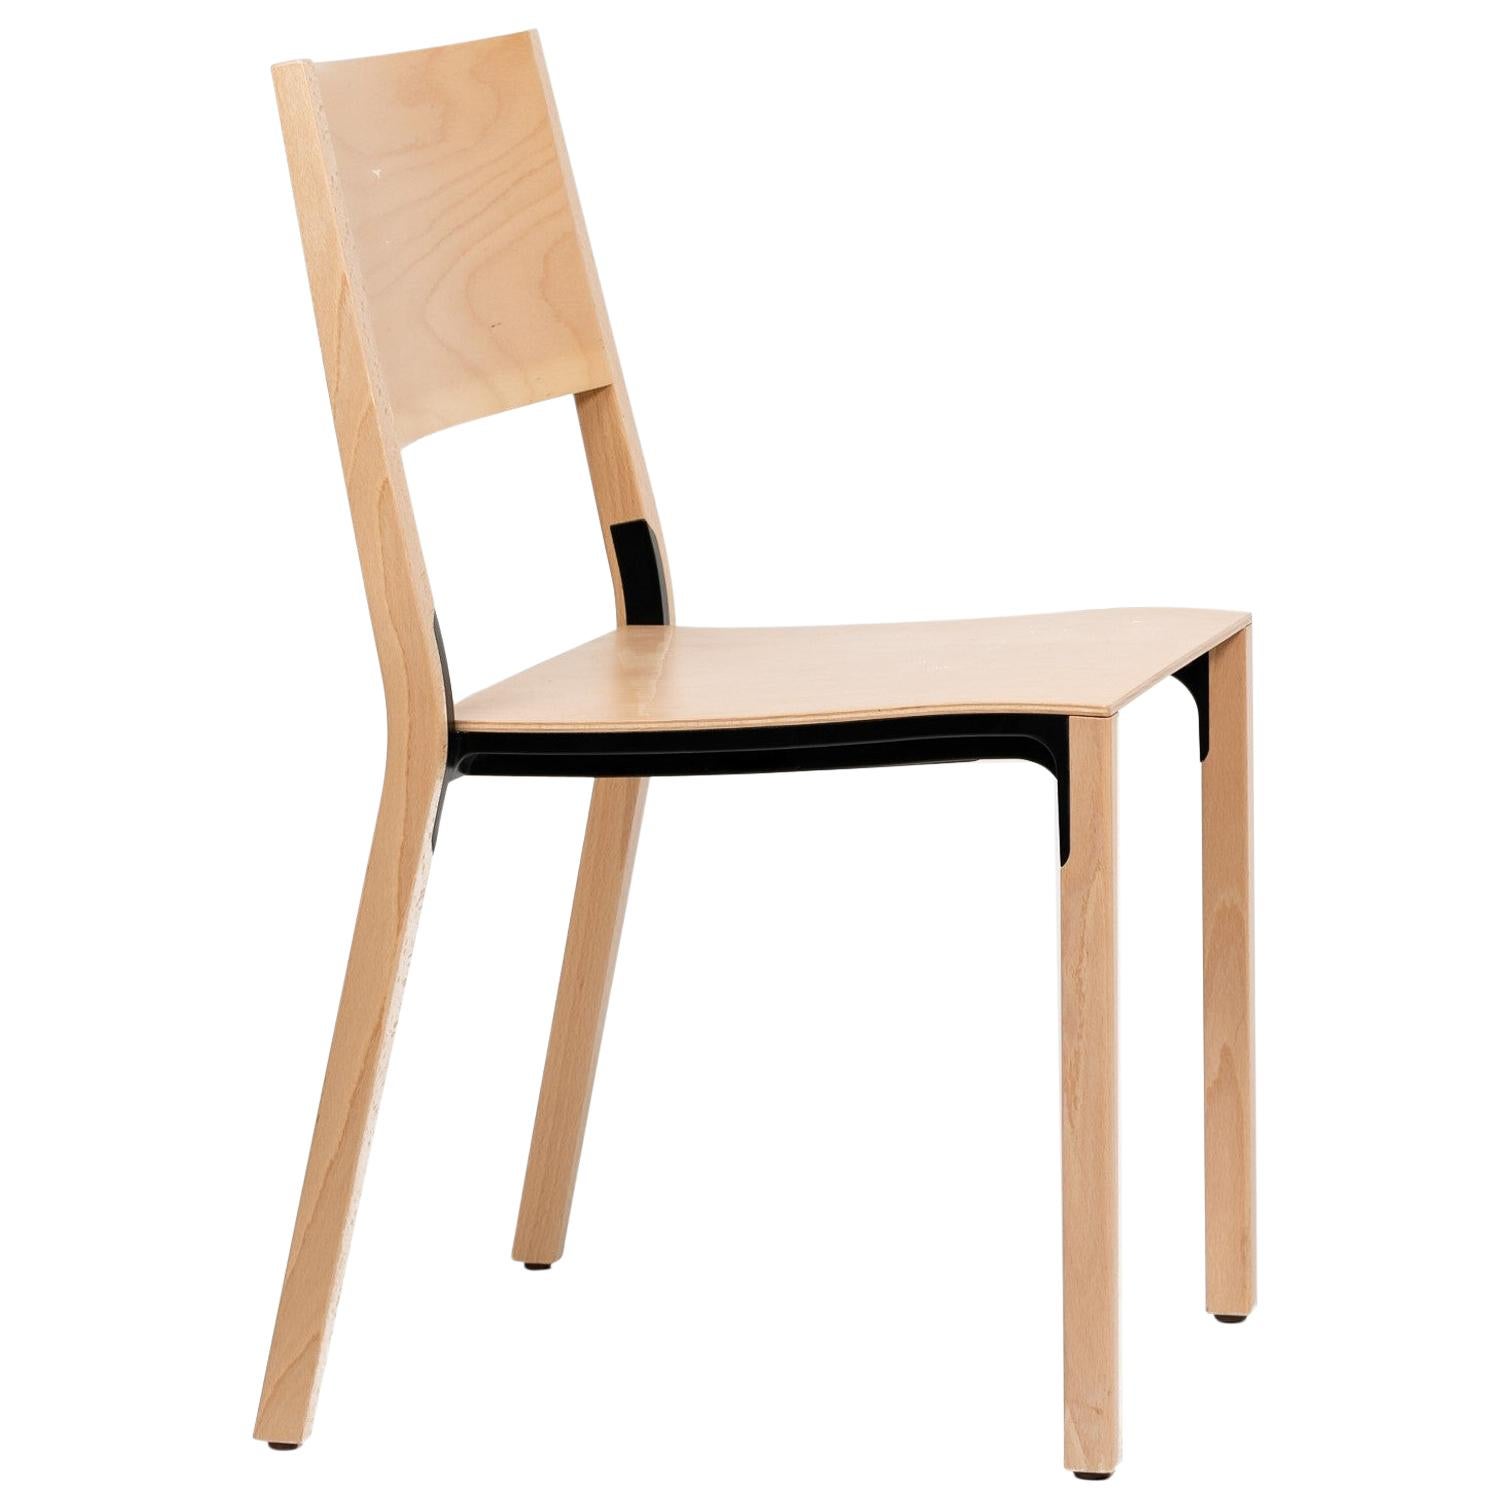 End of Series

Base is a favorite of architects. The chair is a high-end piece of engineering with its aluminum die-cast frame, and the wood/metal screw-less patented connection from Dietiker. 

Designed by Greutmann Bolzern in 2003.

In 1984,